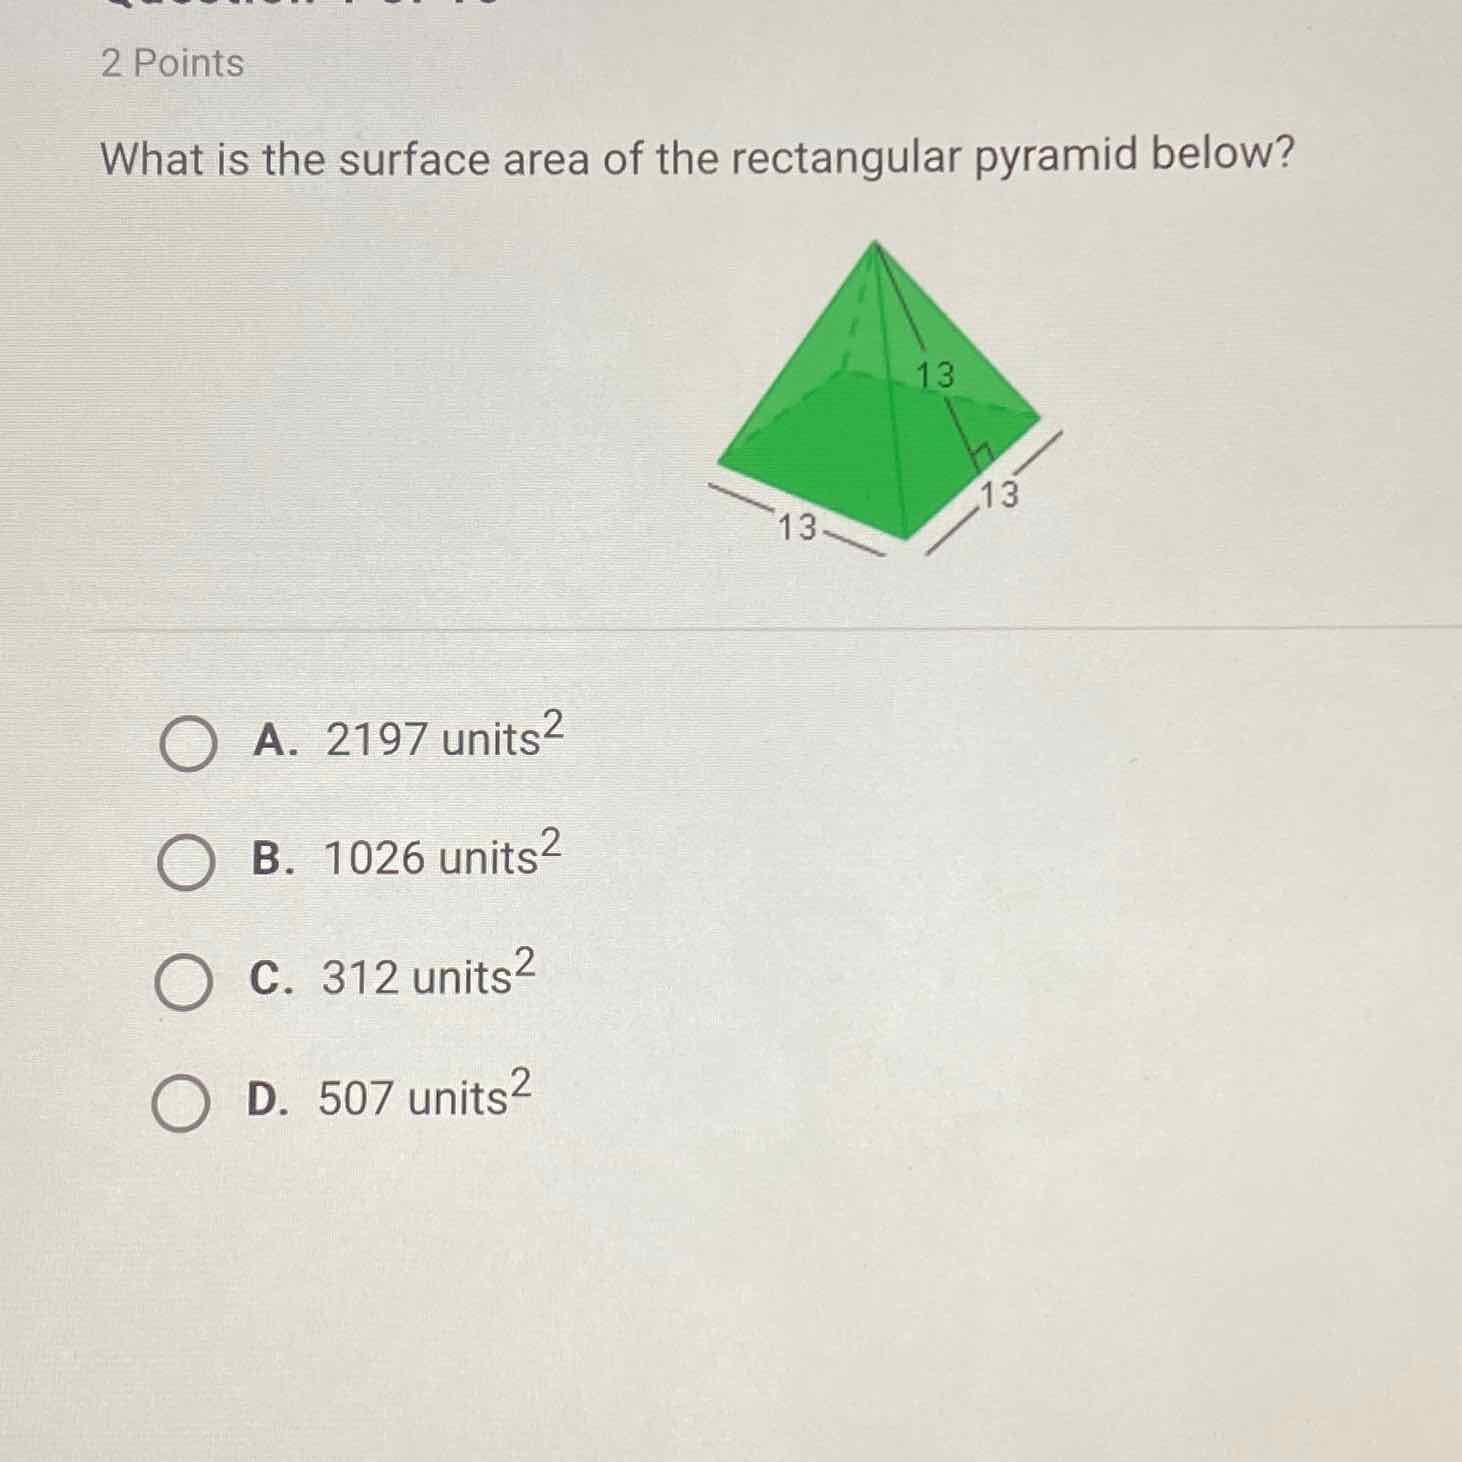 2 Points
What is the surface area of the rectangular pyramid below?
A. 2197 units \( ^{2} \)
B. 1026 units \( ^{2} \)
C. 312 units \( ^{2} \)
D. 507 units \( ^{2} \)